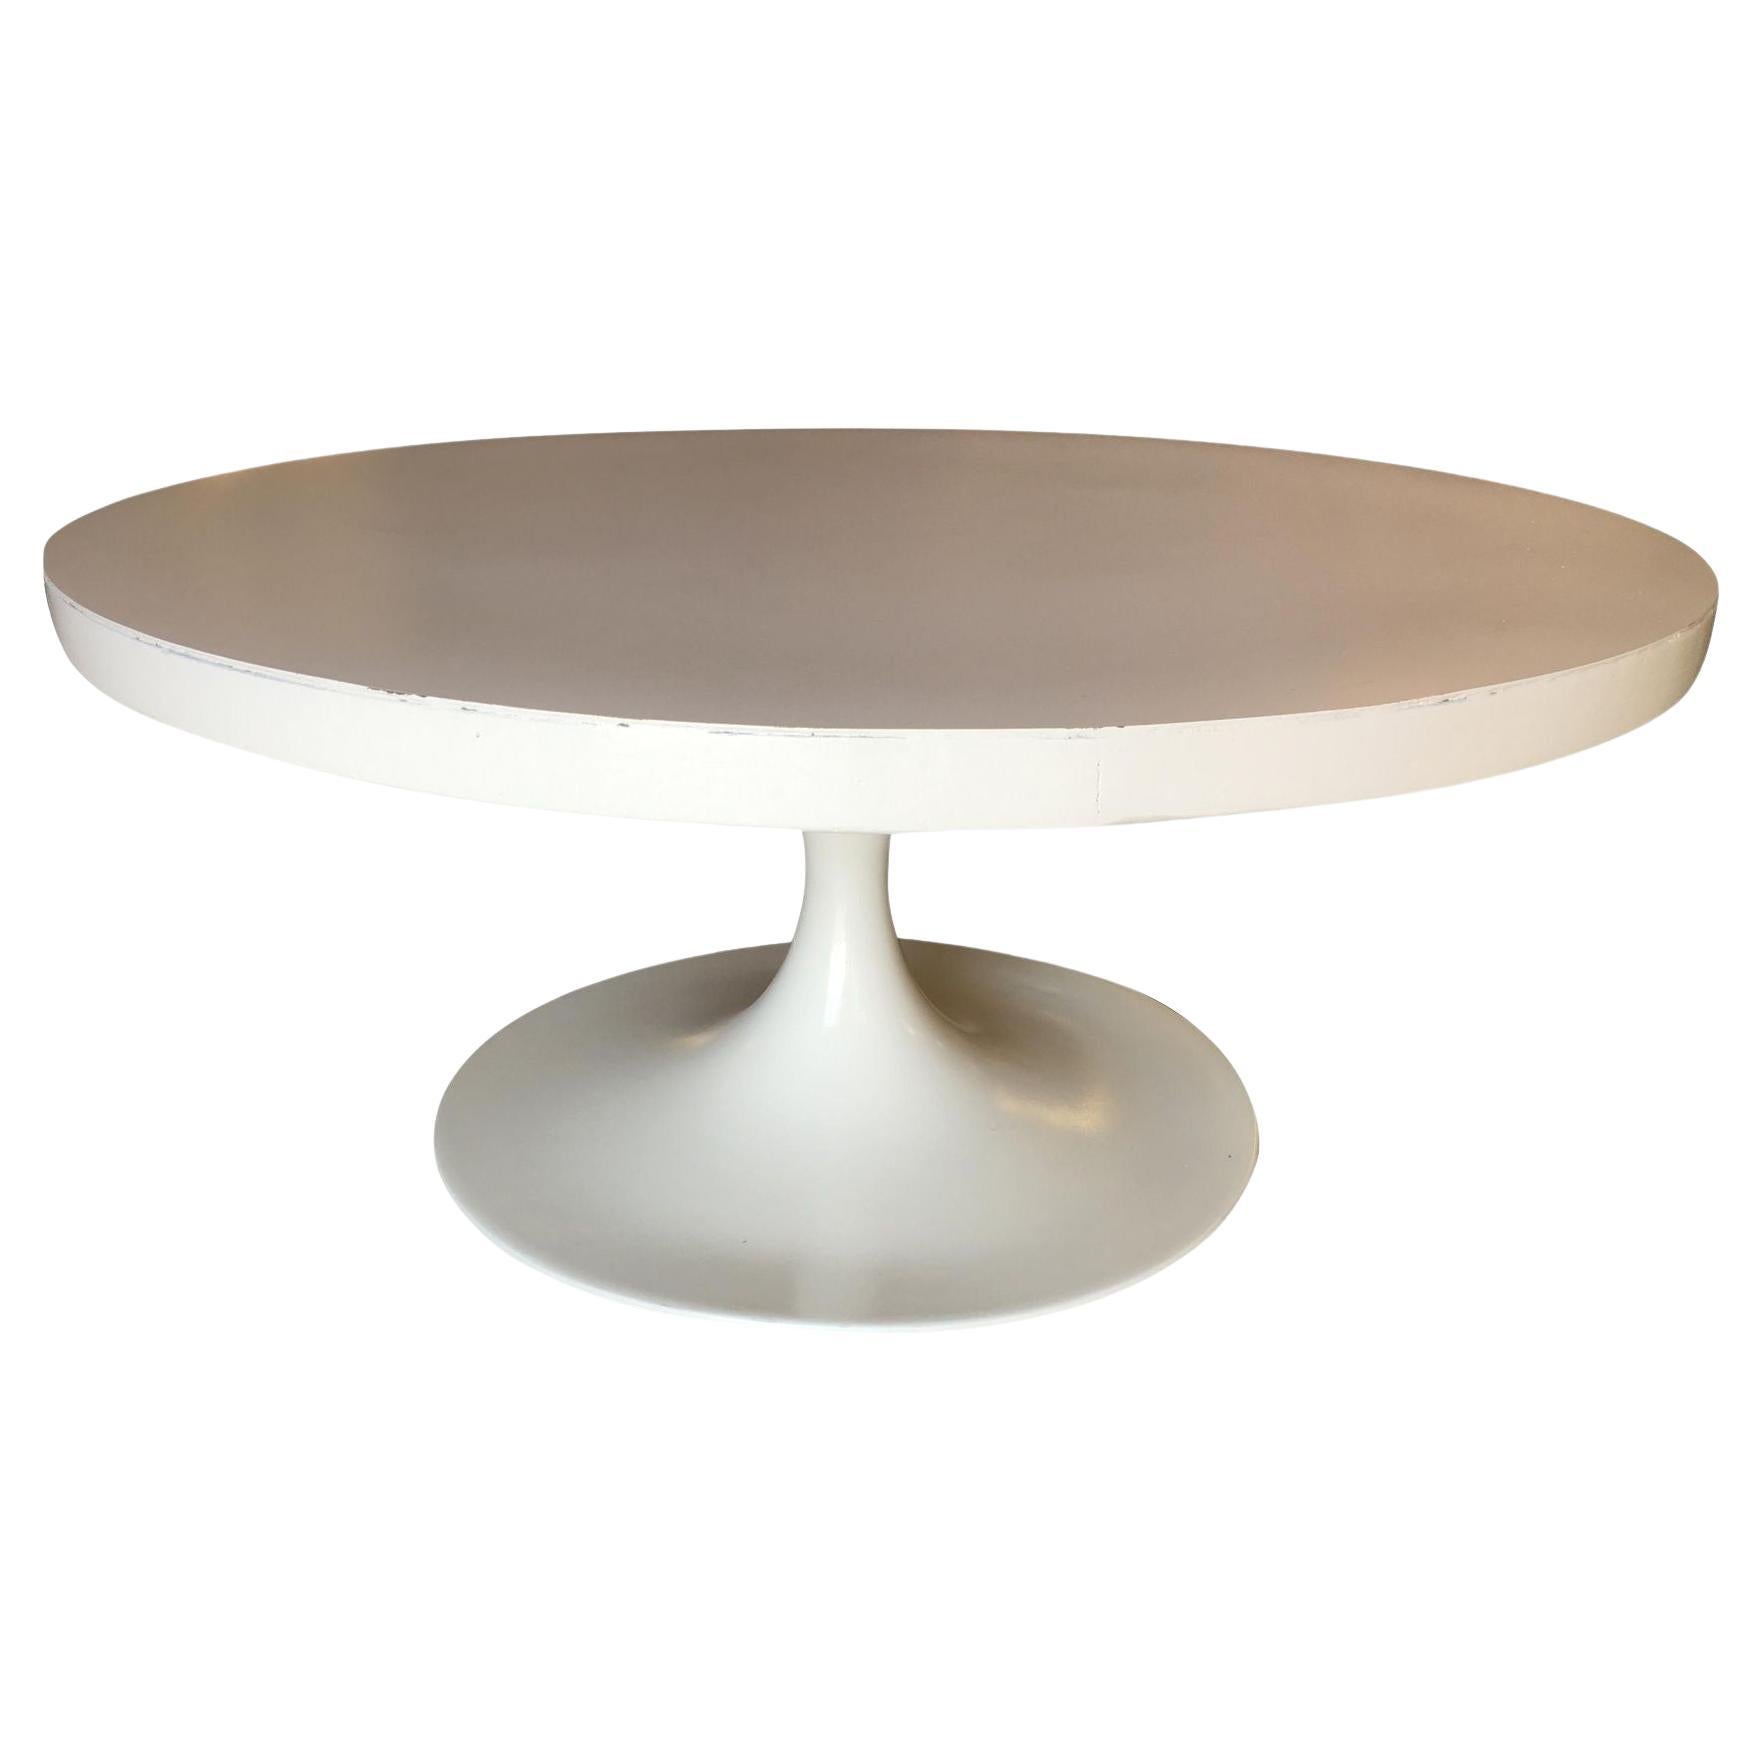 36" Inch Heavy Top Tulip Coffee Table in the Style of Eero Saarinen for Knoll For Sale